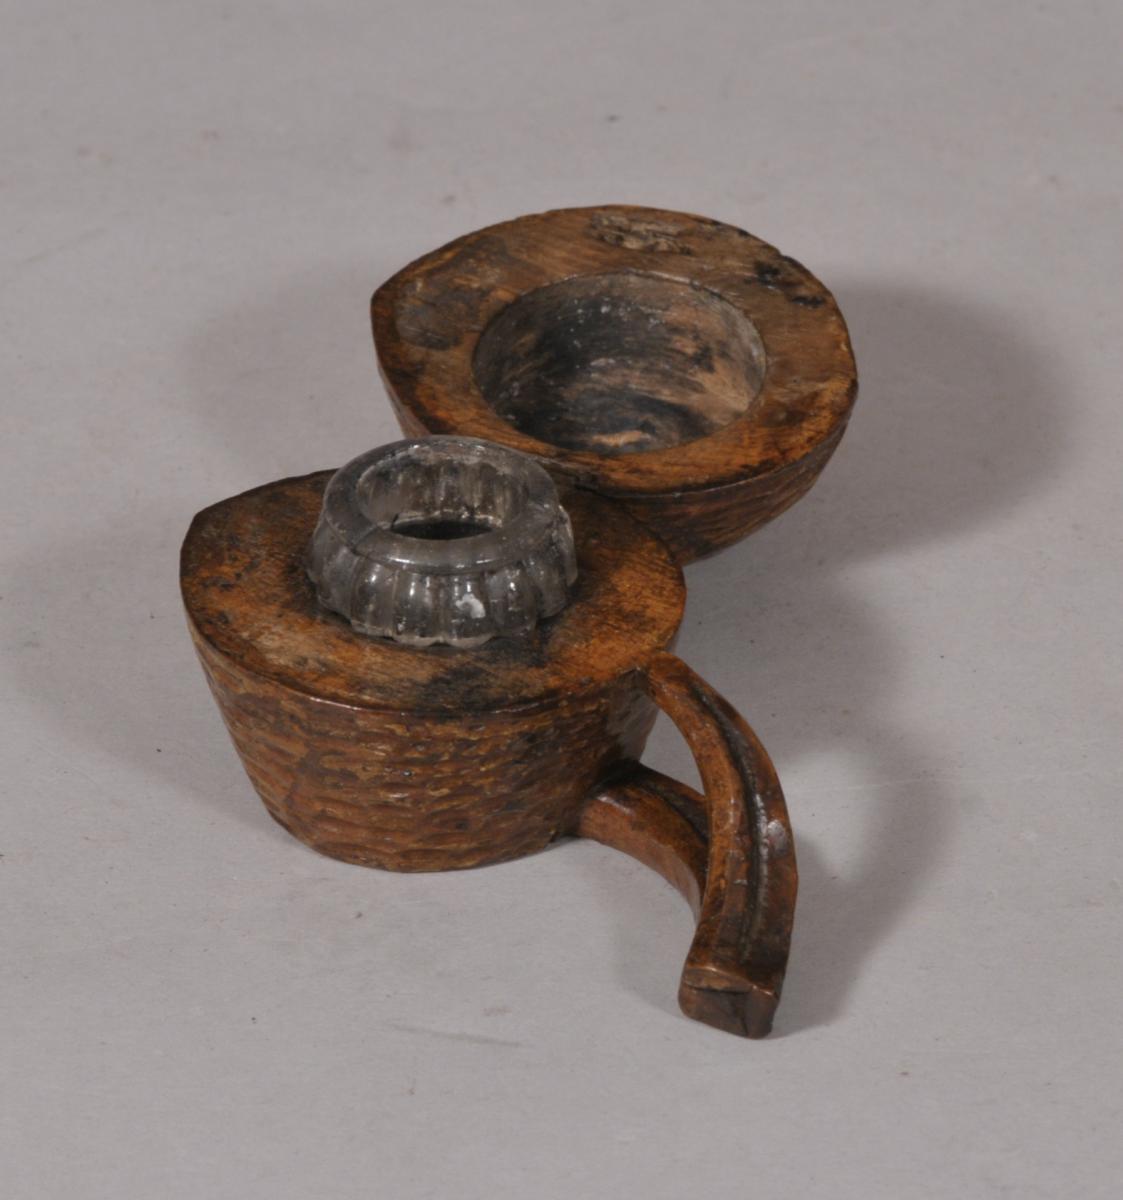 S/5399 Antique Treen Late Victorian Carved Wood Ink Well in the form of a nut